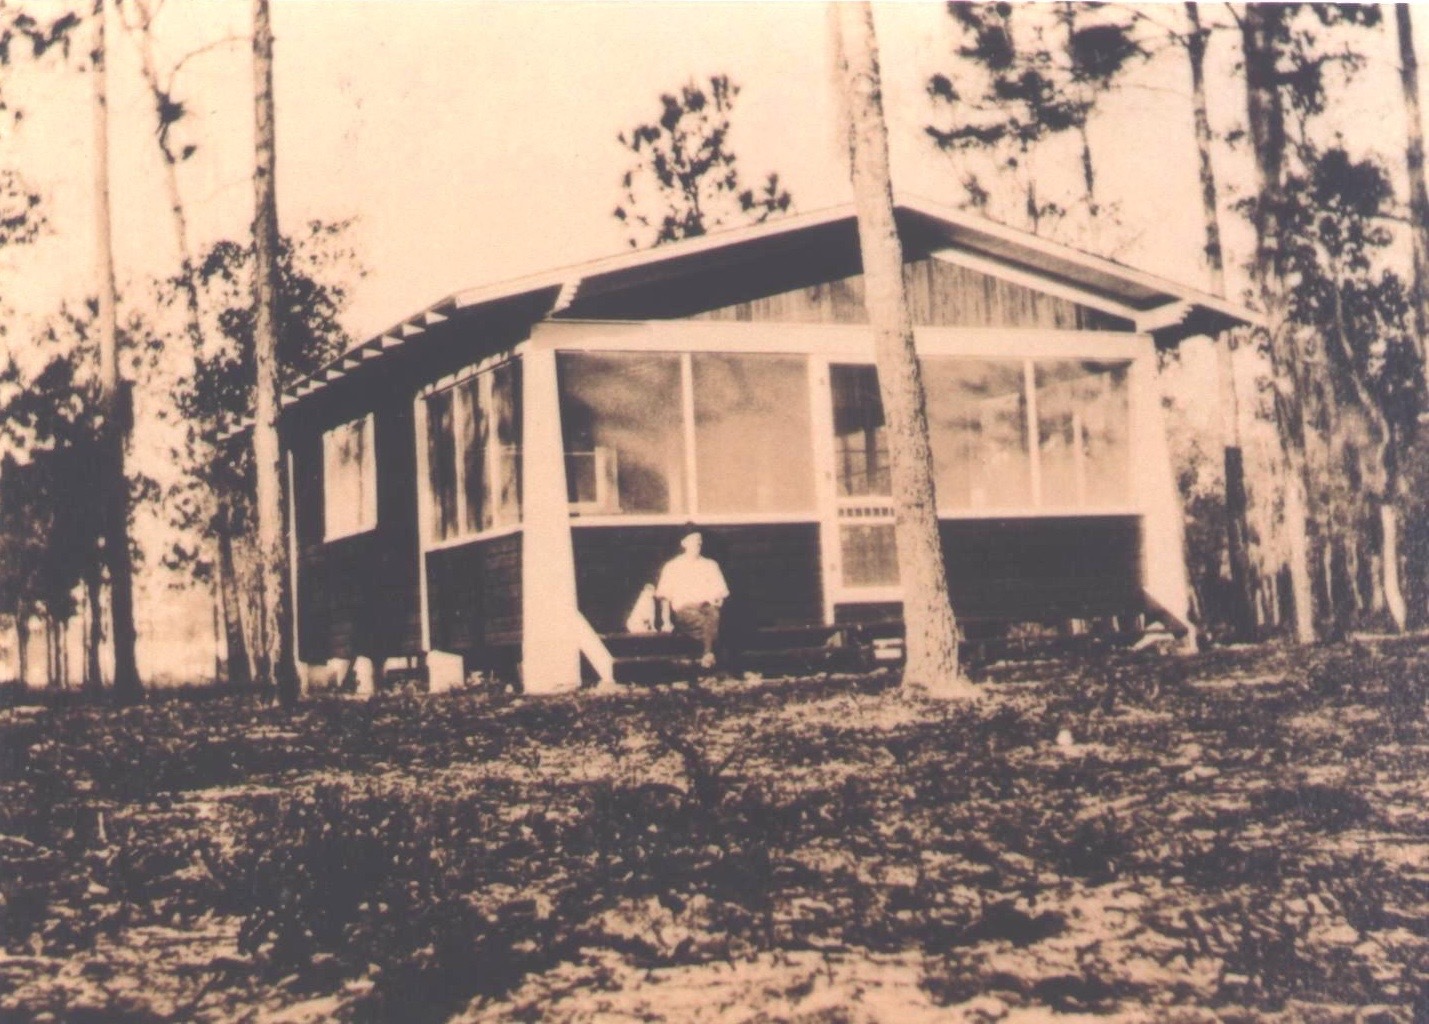 This is the oldest photo of the building. It depicts Cal Palmer in front of his office in 1912.